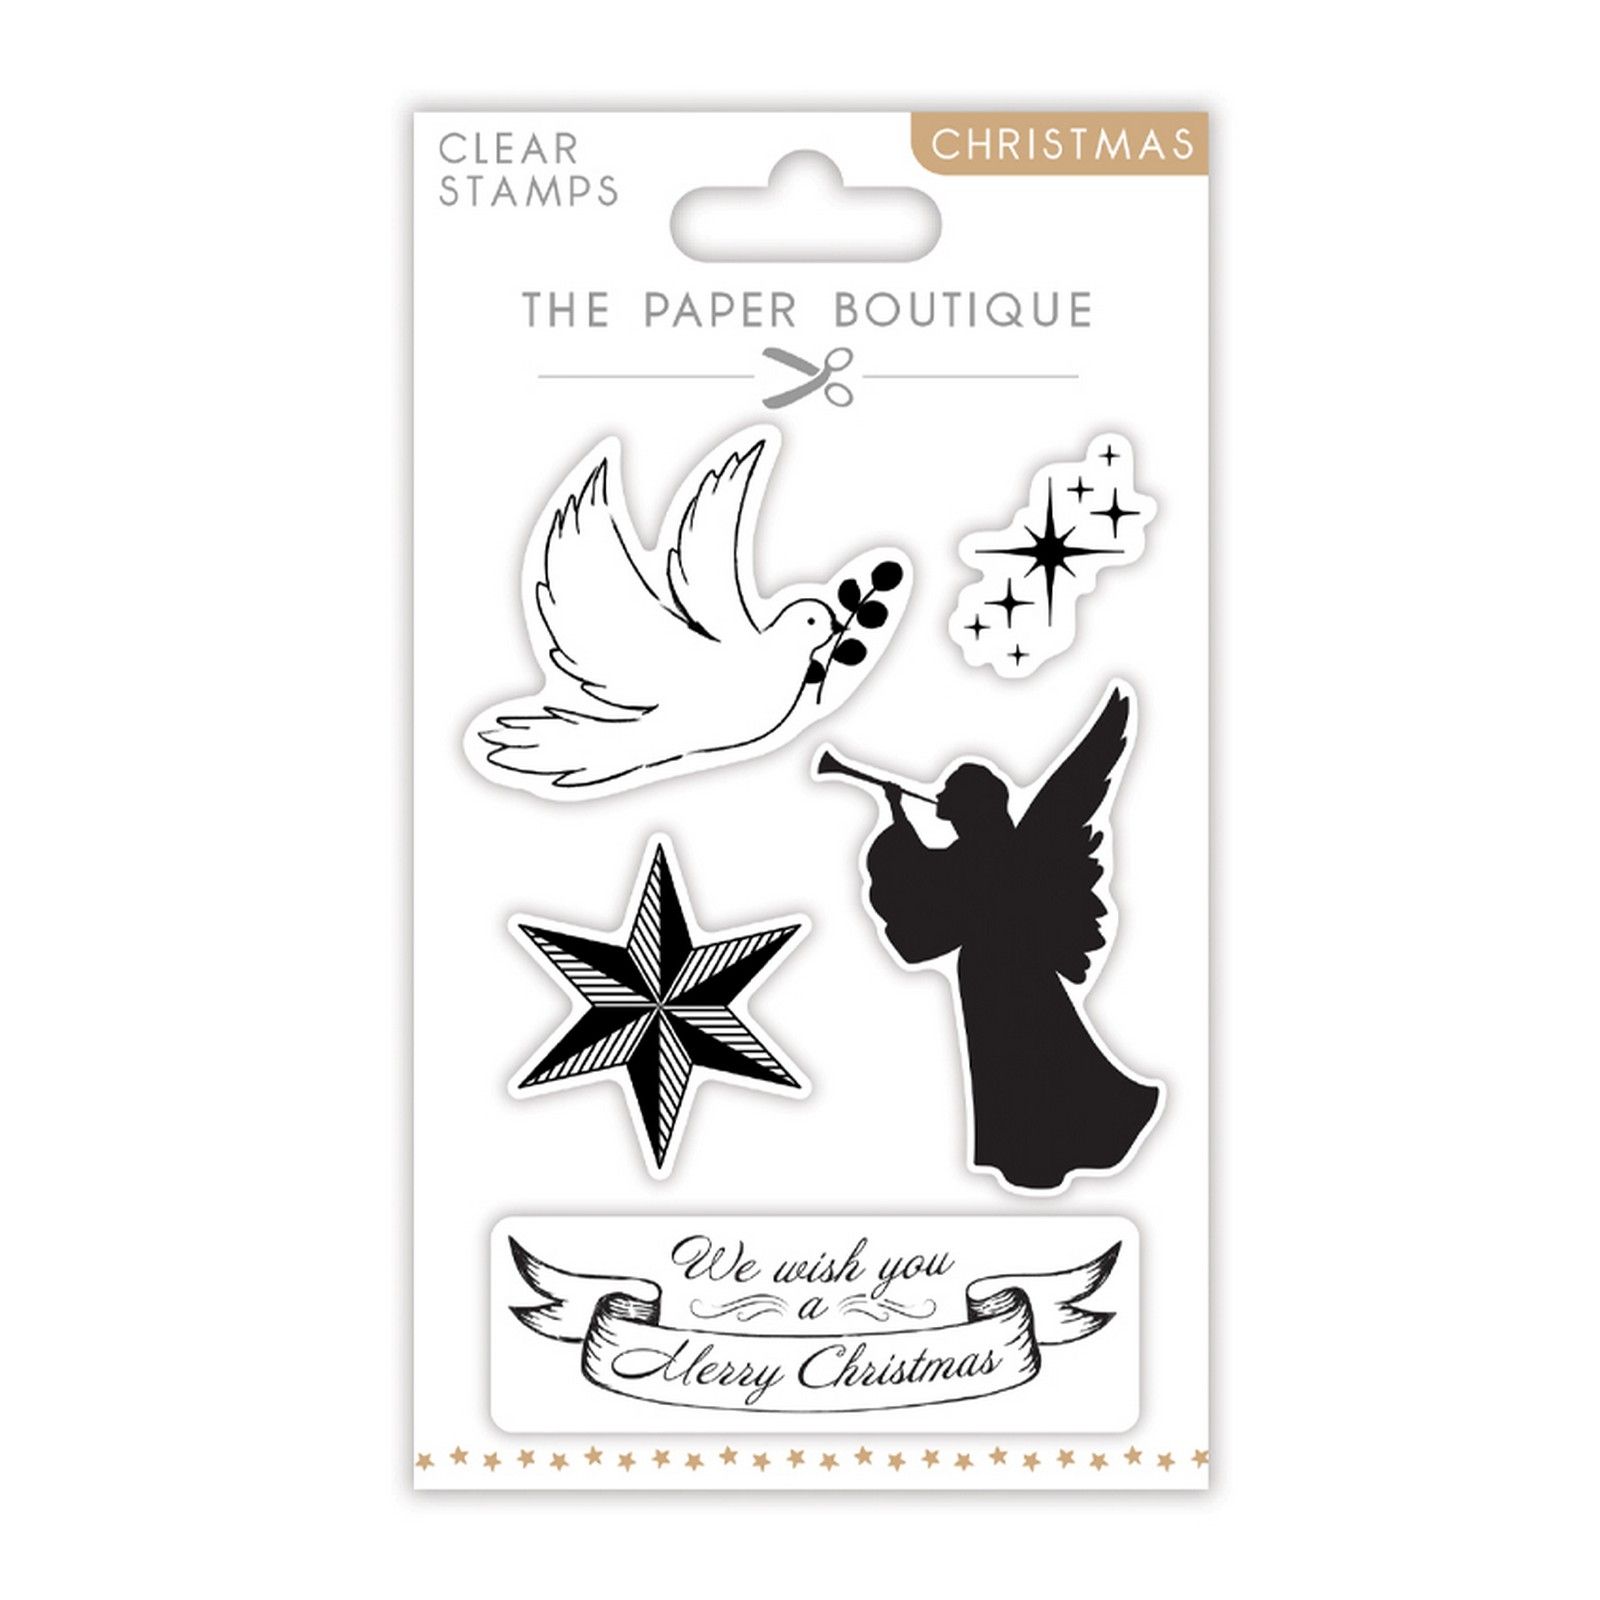 The Paper Boutique • Christmas clear stamps Angels